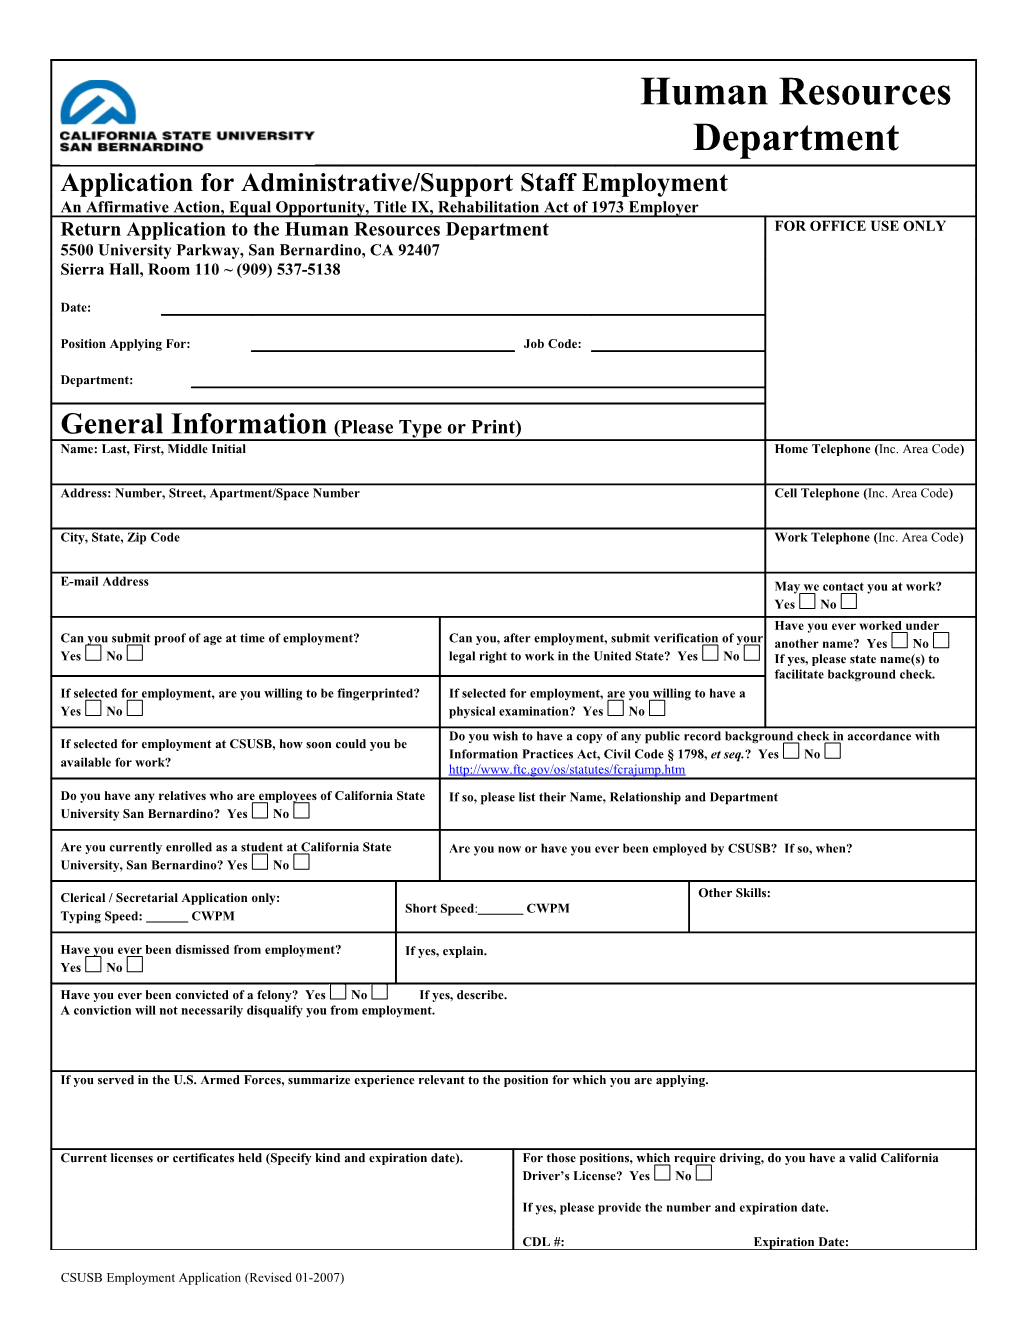 Application for Administrative/Support Staff Employment